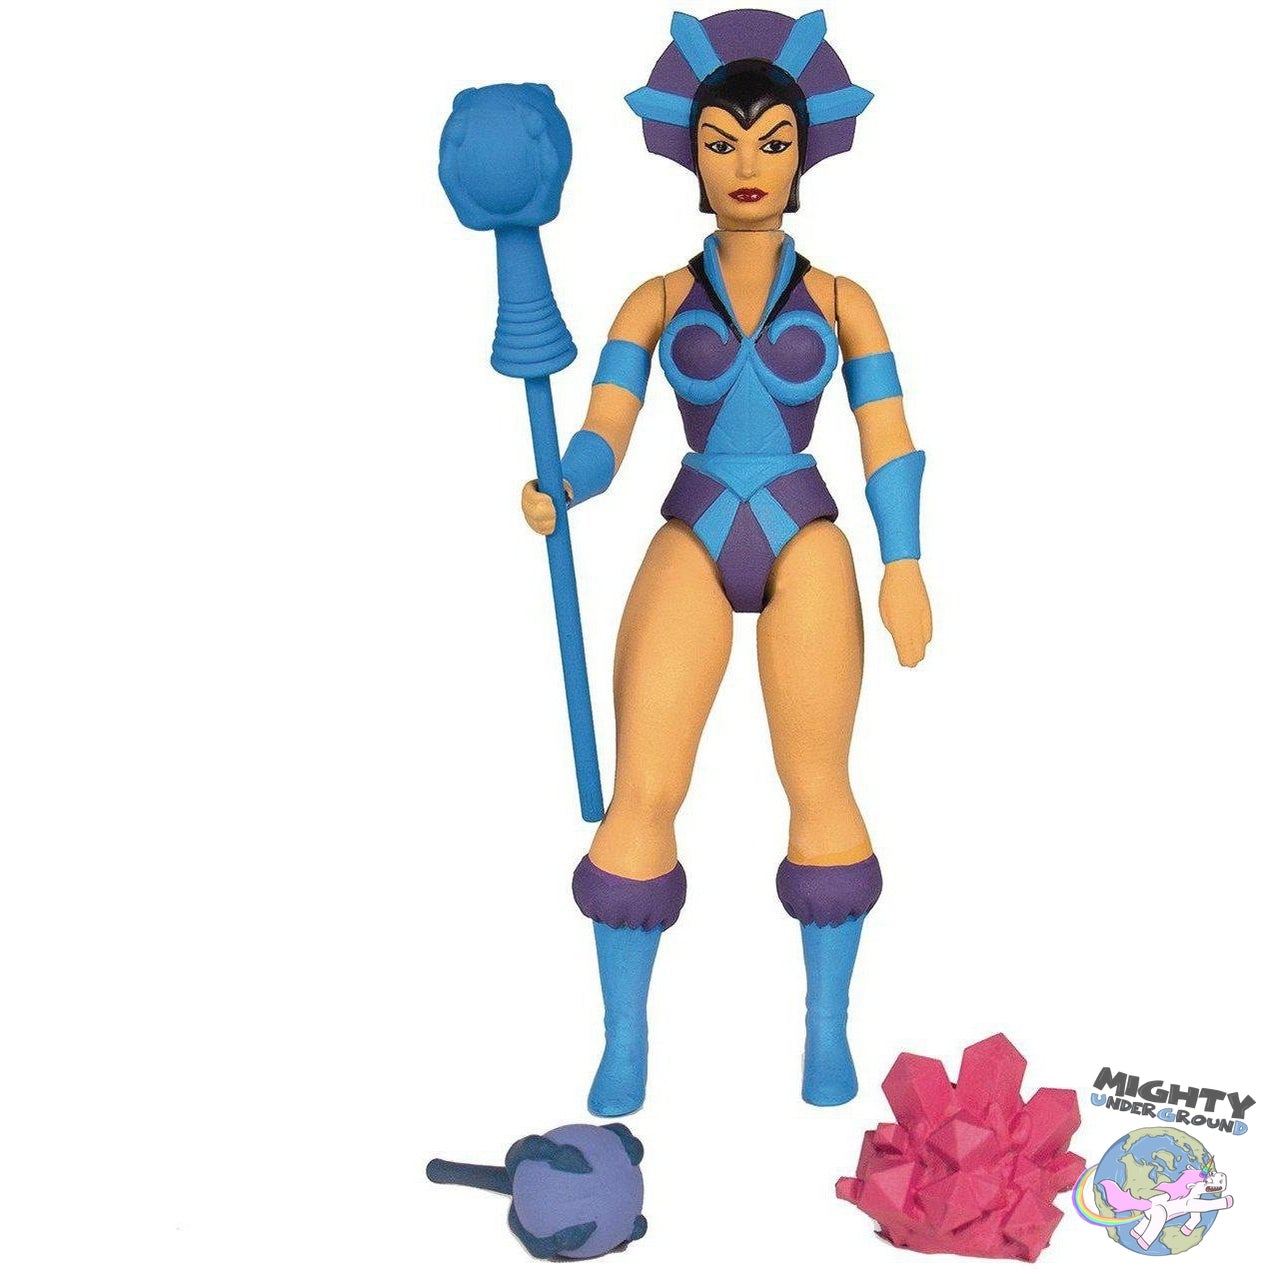 Masters of the Universe Vintage Collection: Evil-Lyn-Actionfiguren-Super7-Mighty Underground